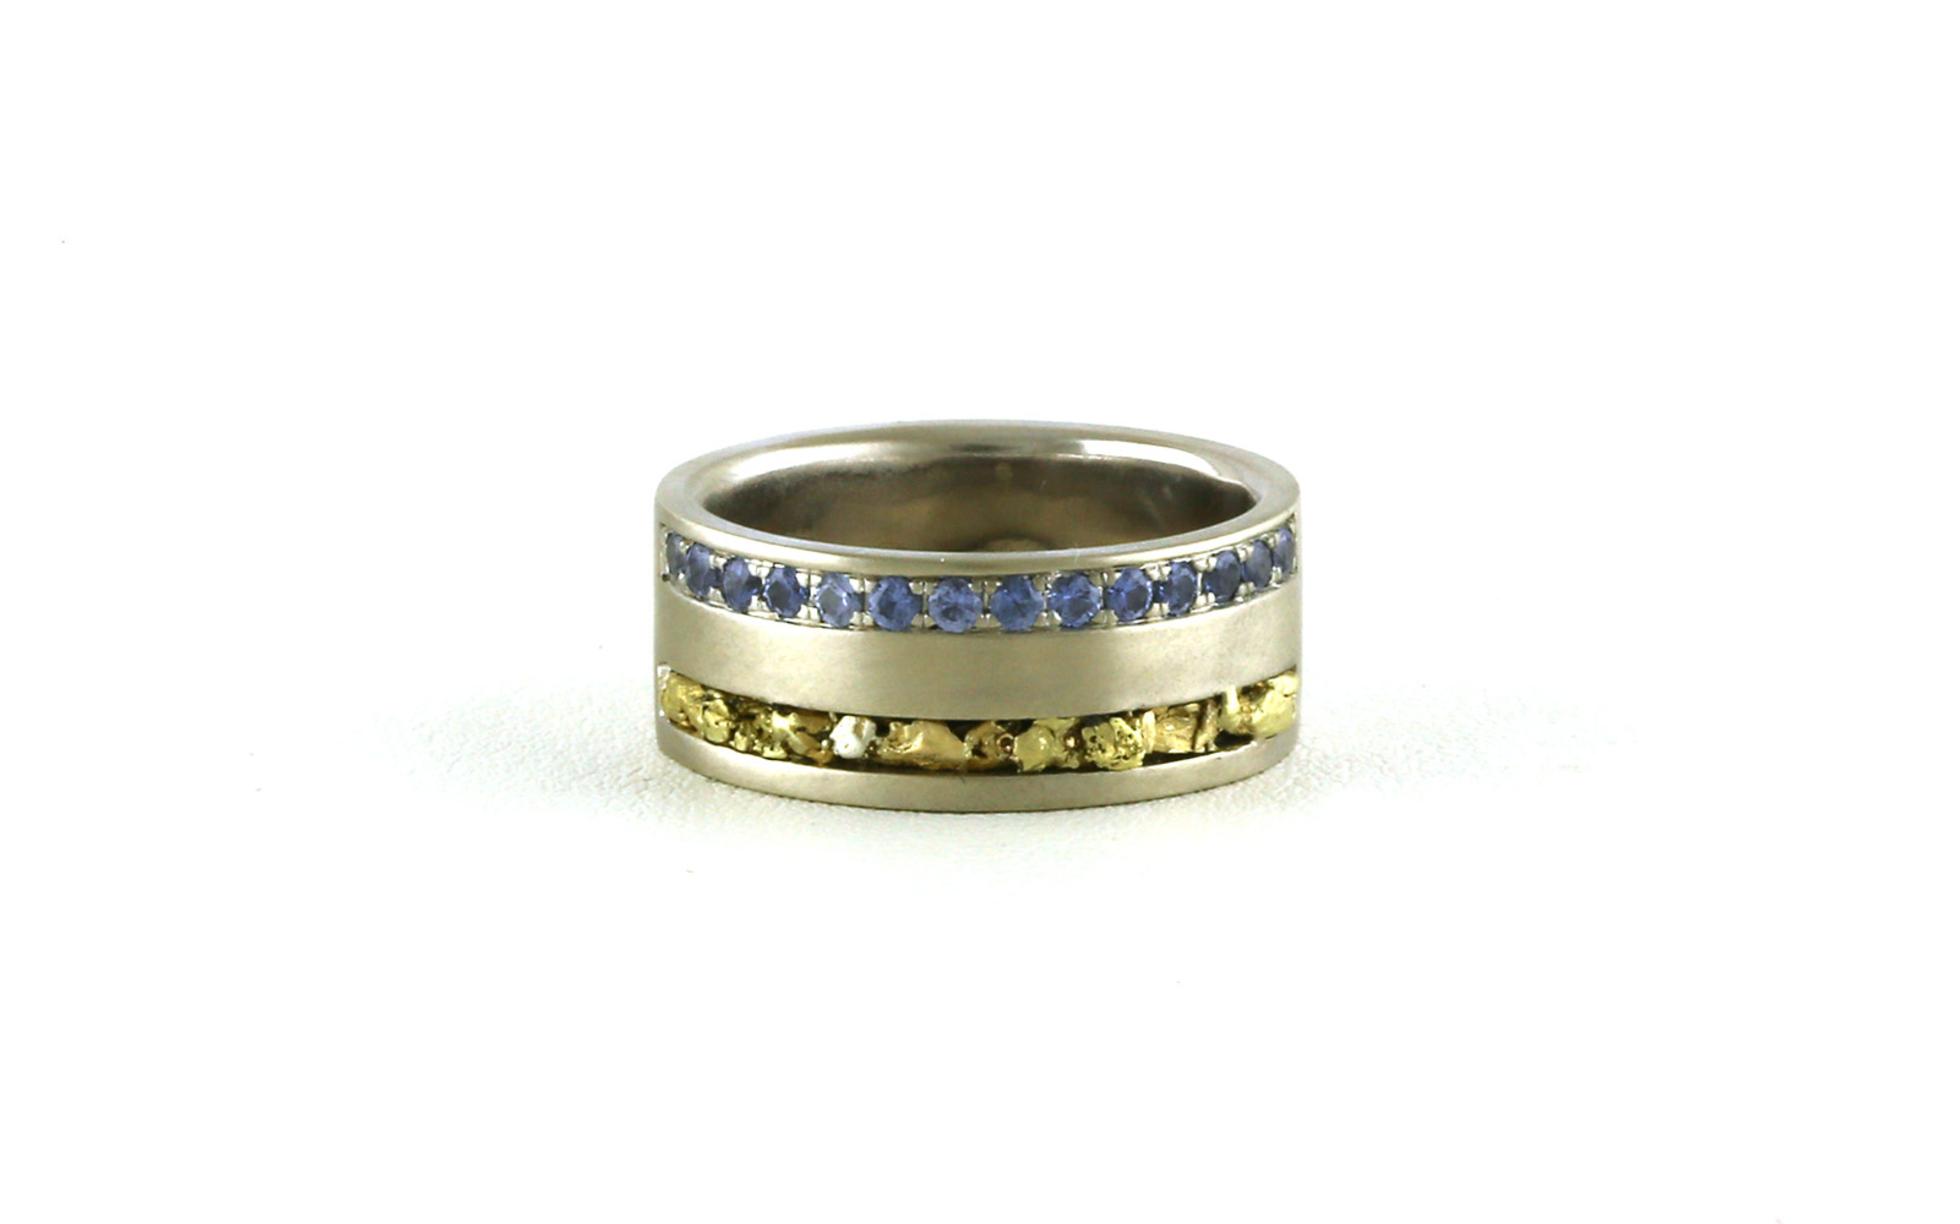 2-row Channel-set Montana Yogo Sapphire and Yellow Gold Nugget Ring with Sandblast Finish in White Gold (0.38cts TWT)